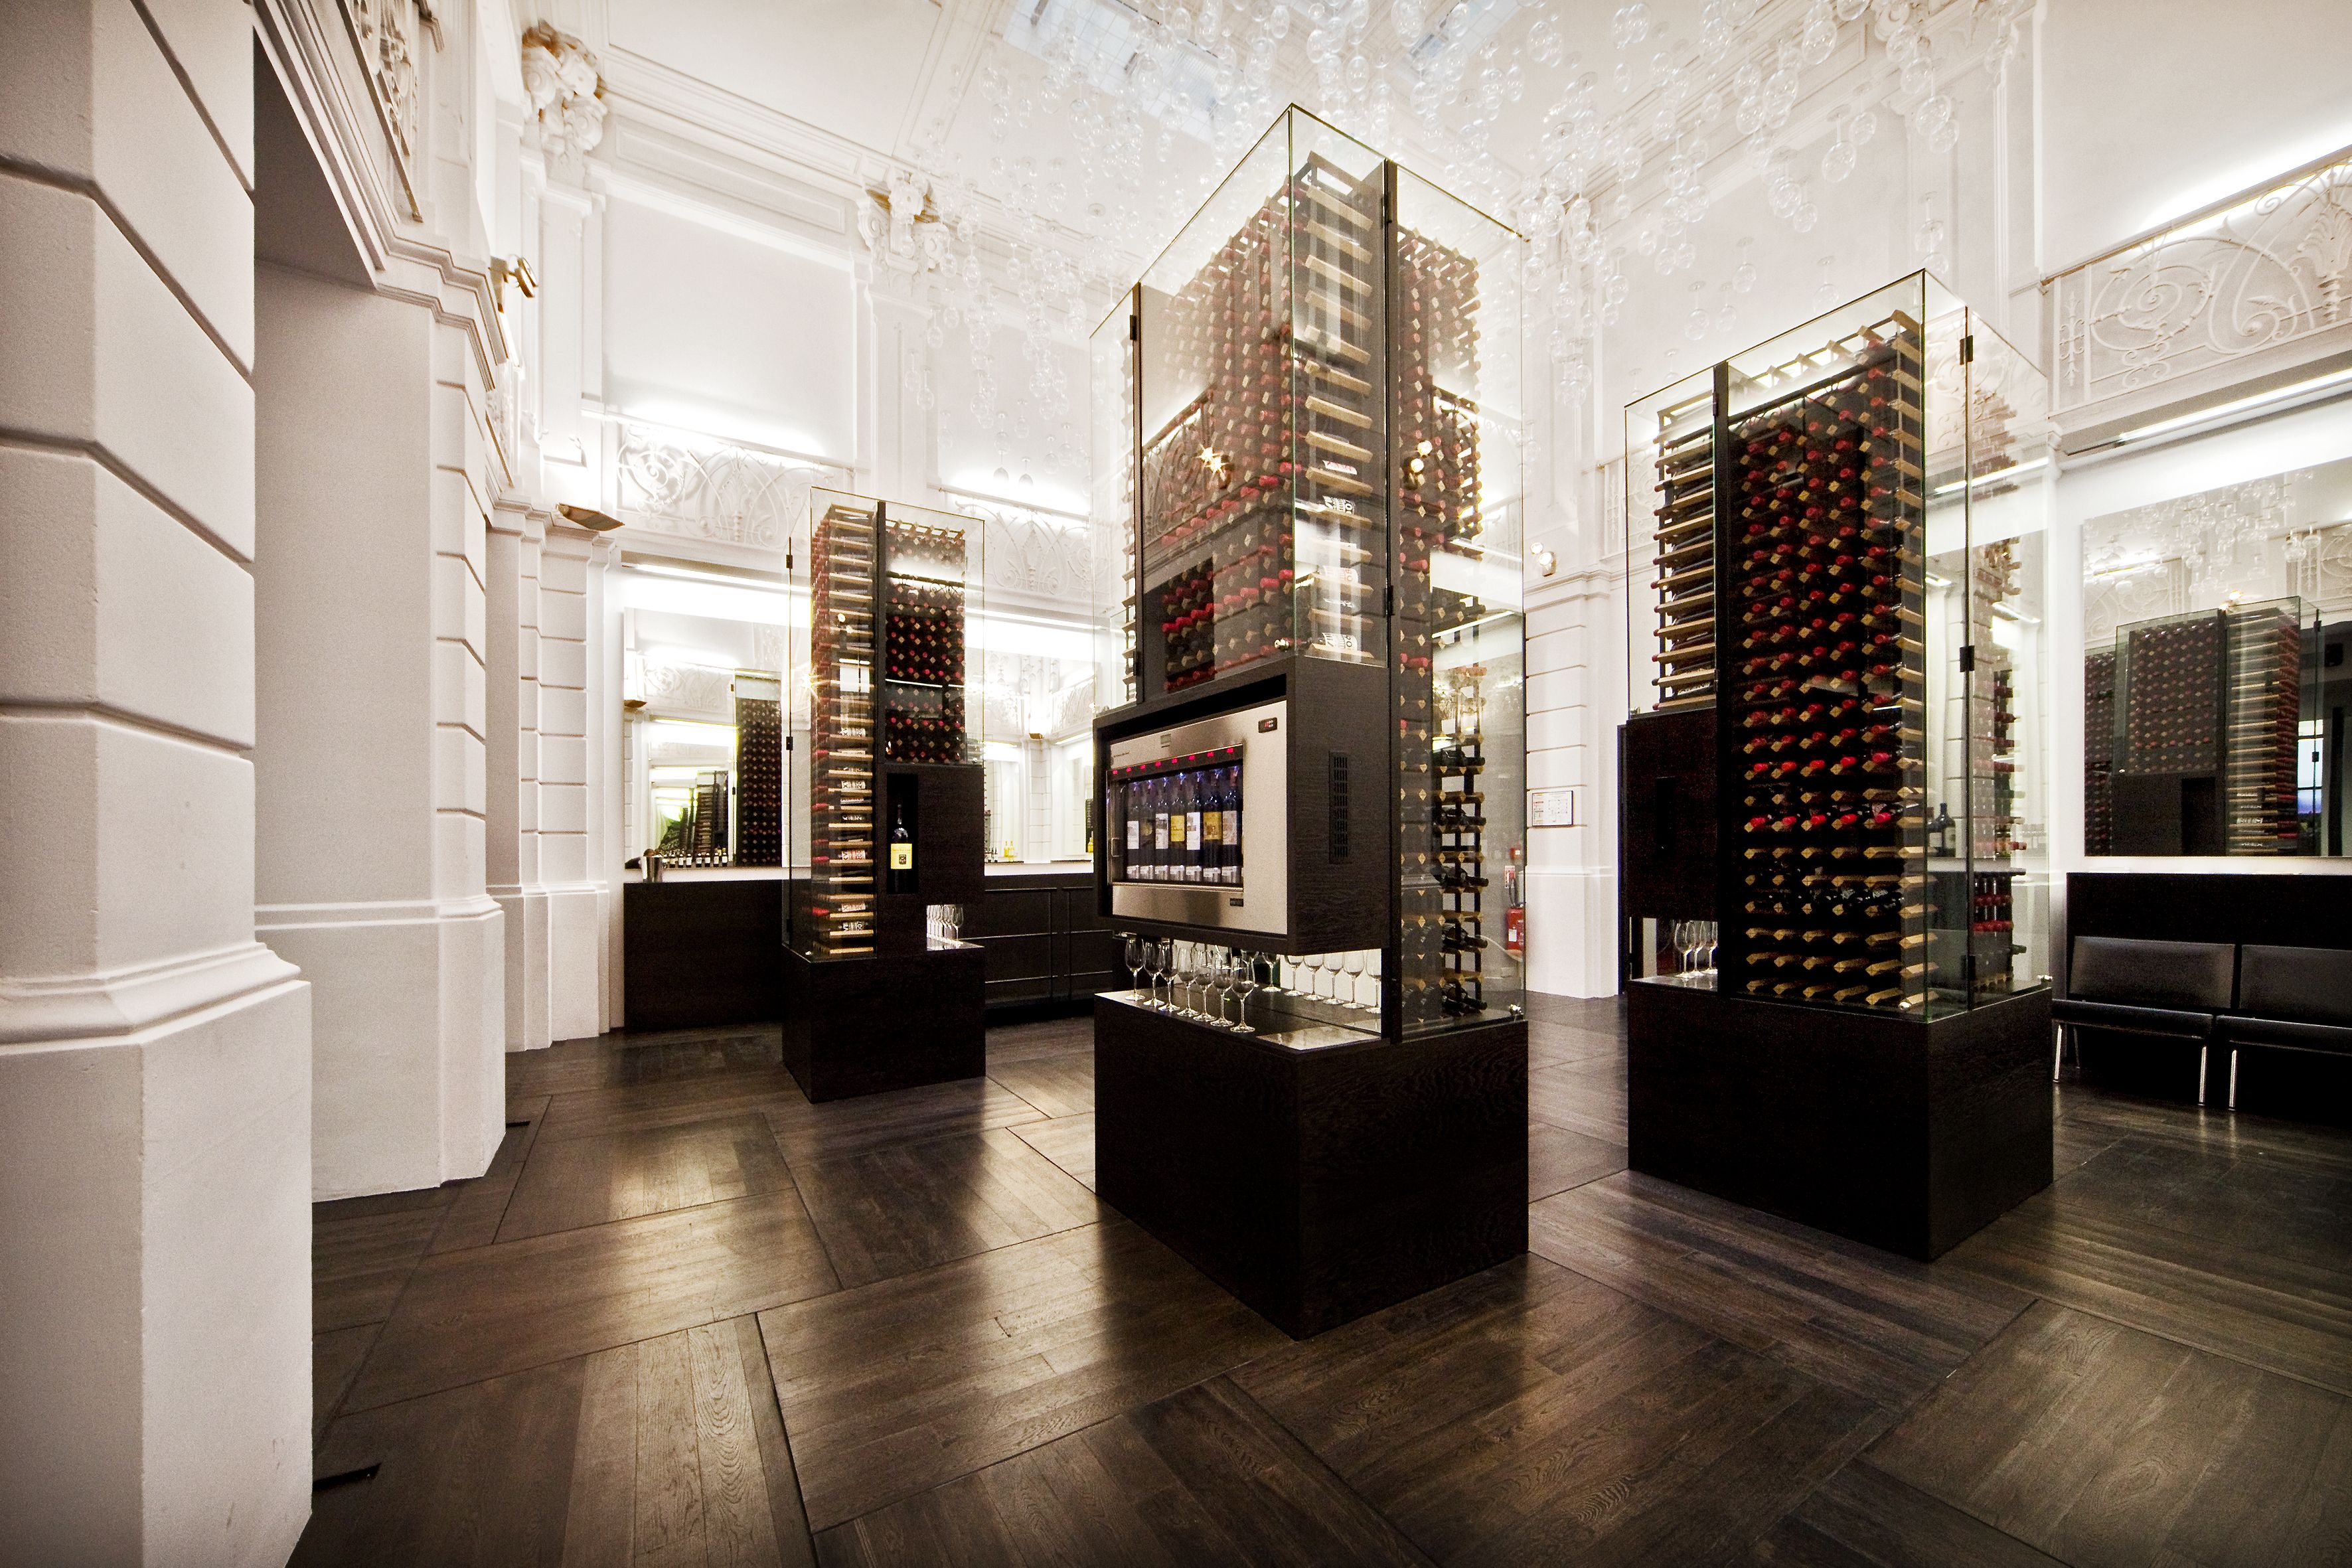 Max Bordeaux, Wine gallery and cellar